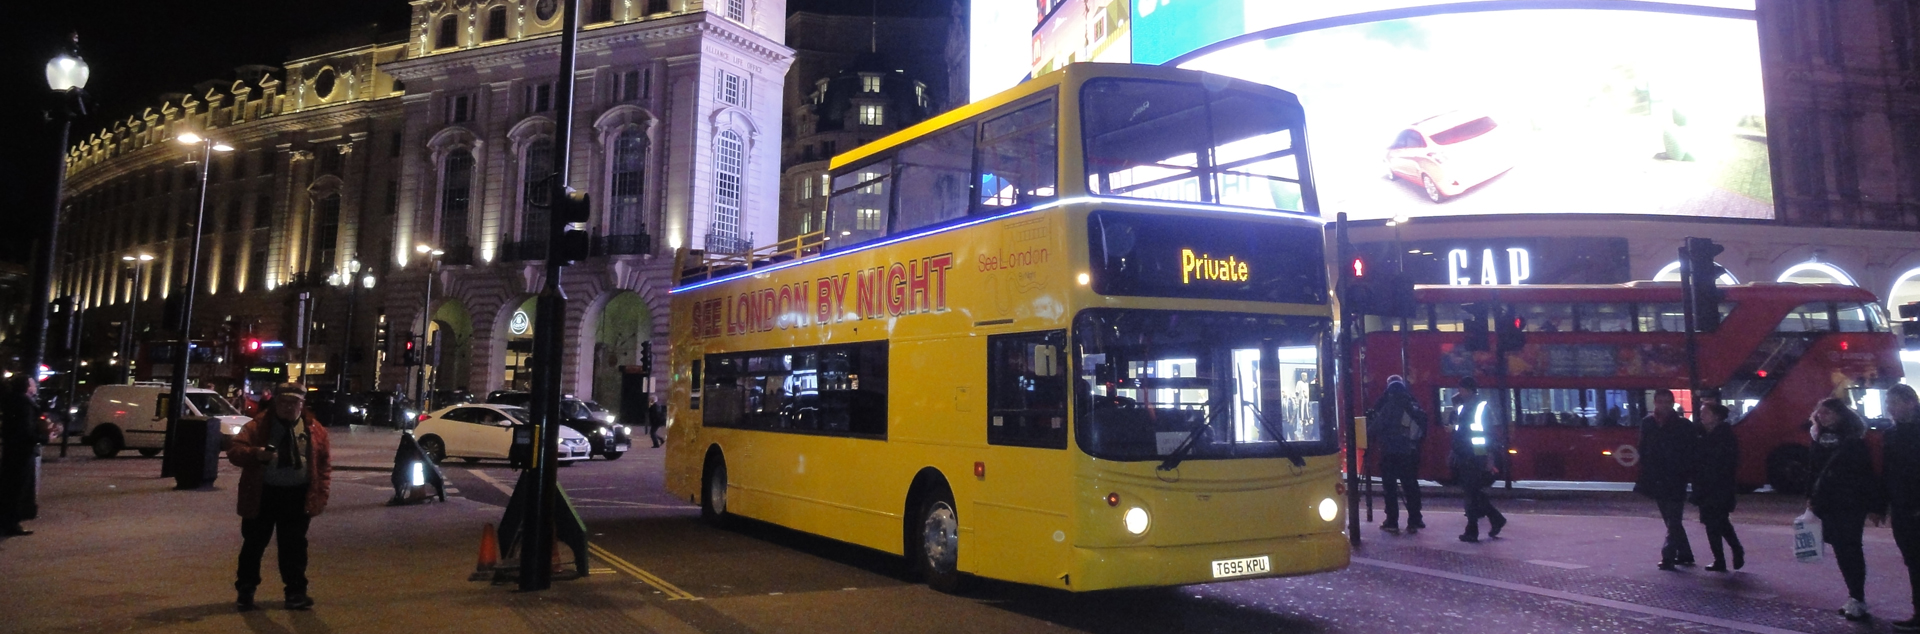 london by night bus tour offers